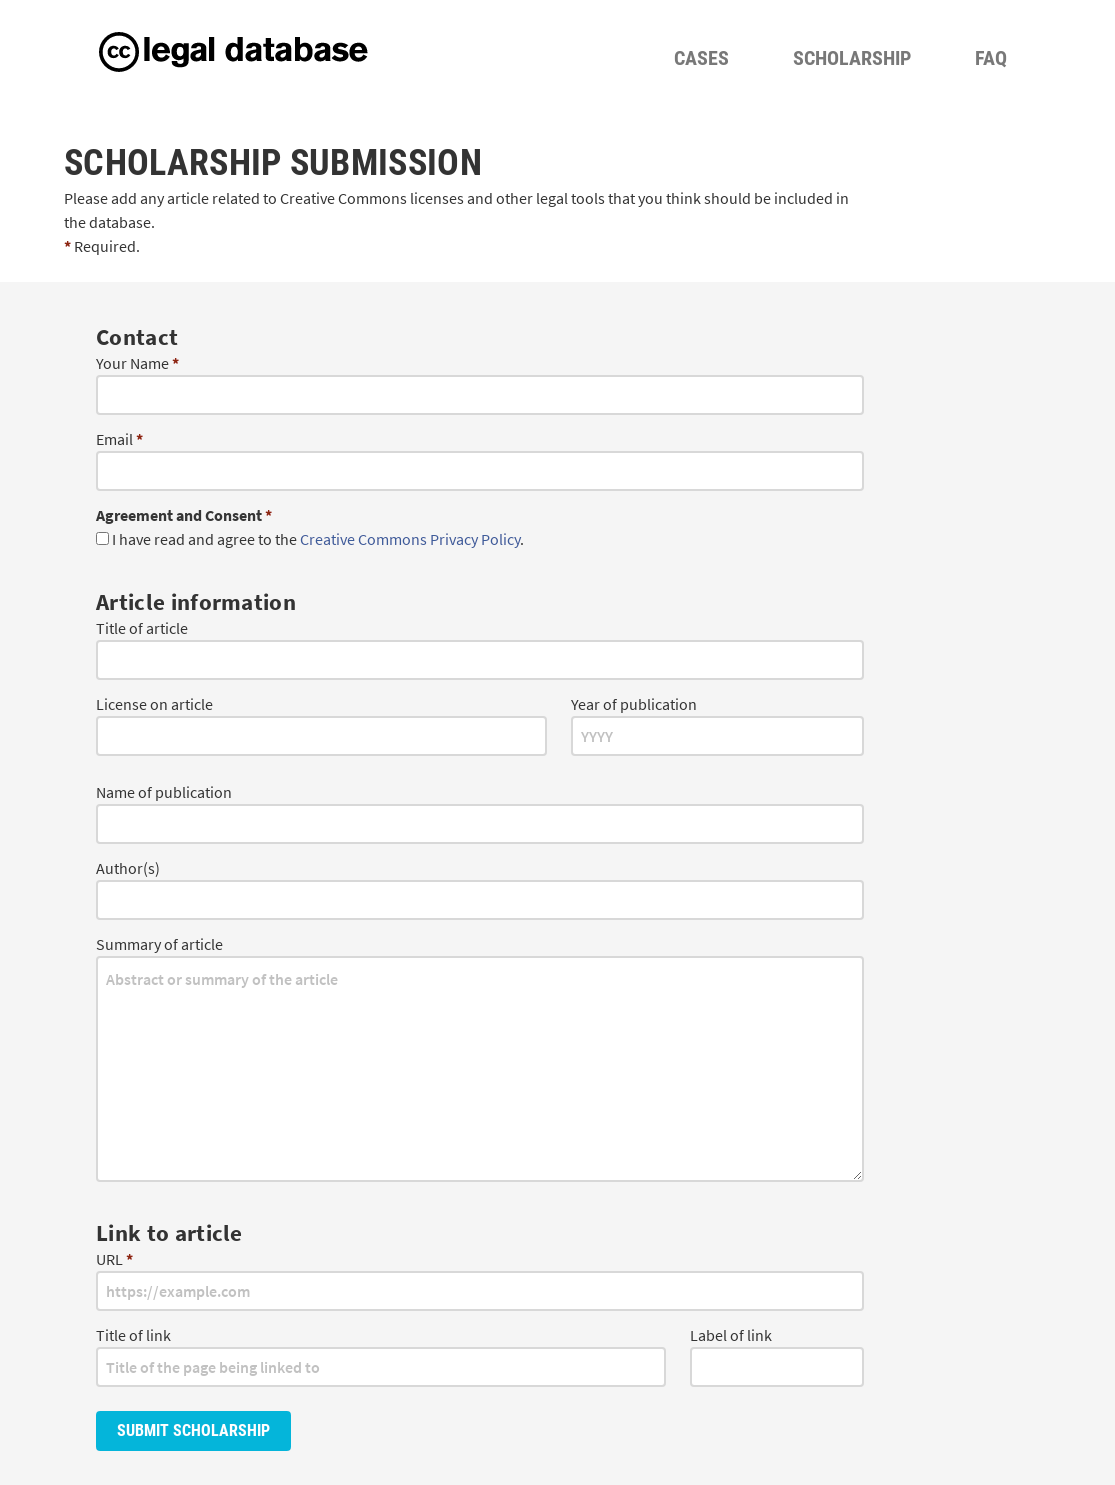 Form to submit an article related to CC licenses